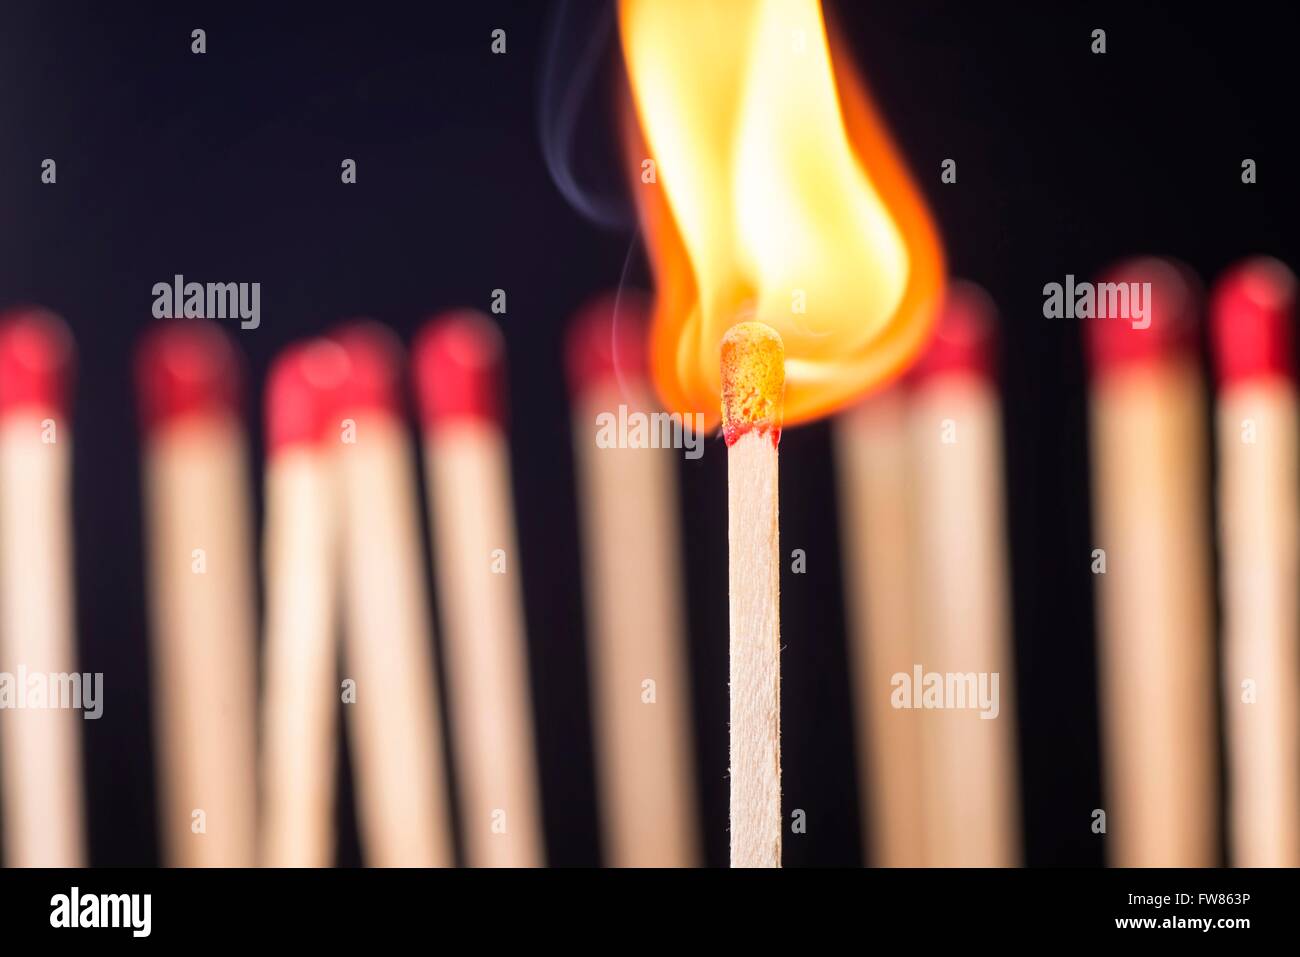 Burning matchstick in front of a new set of matches. Stock Photo